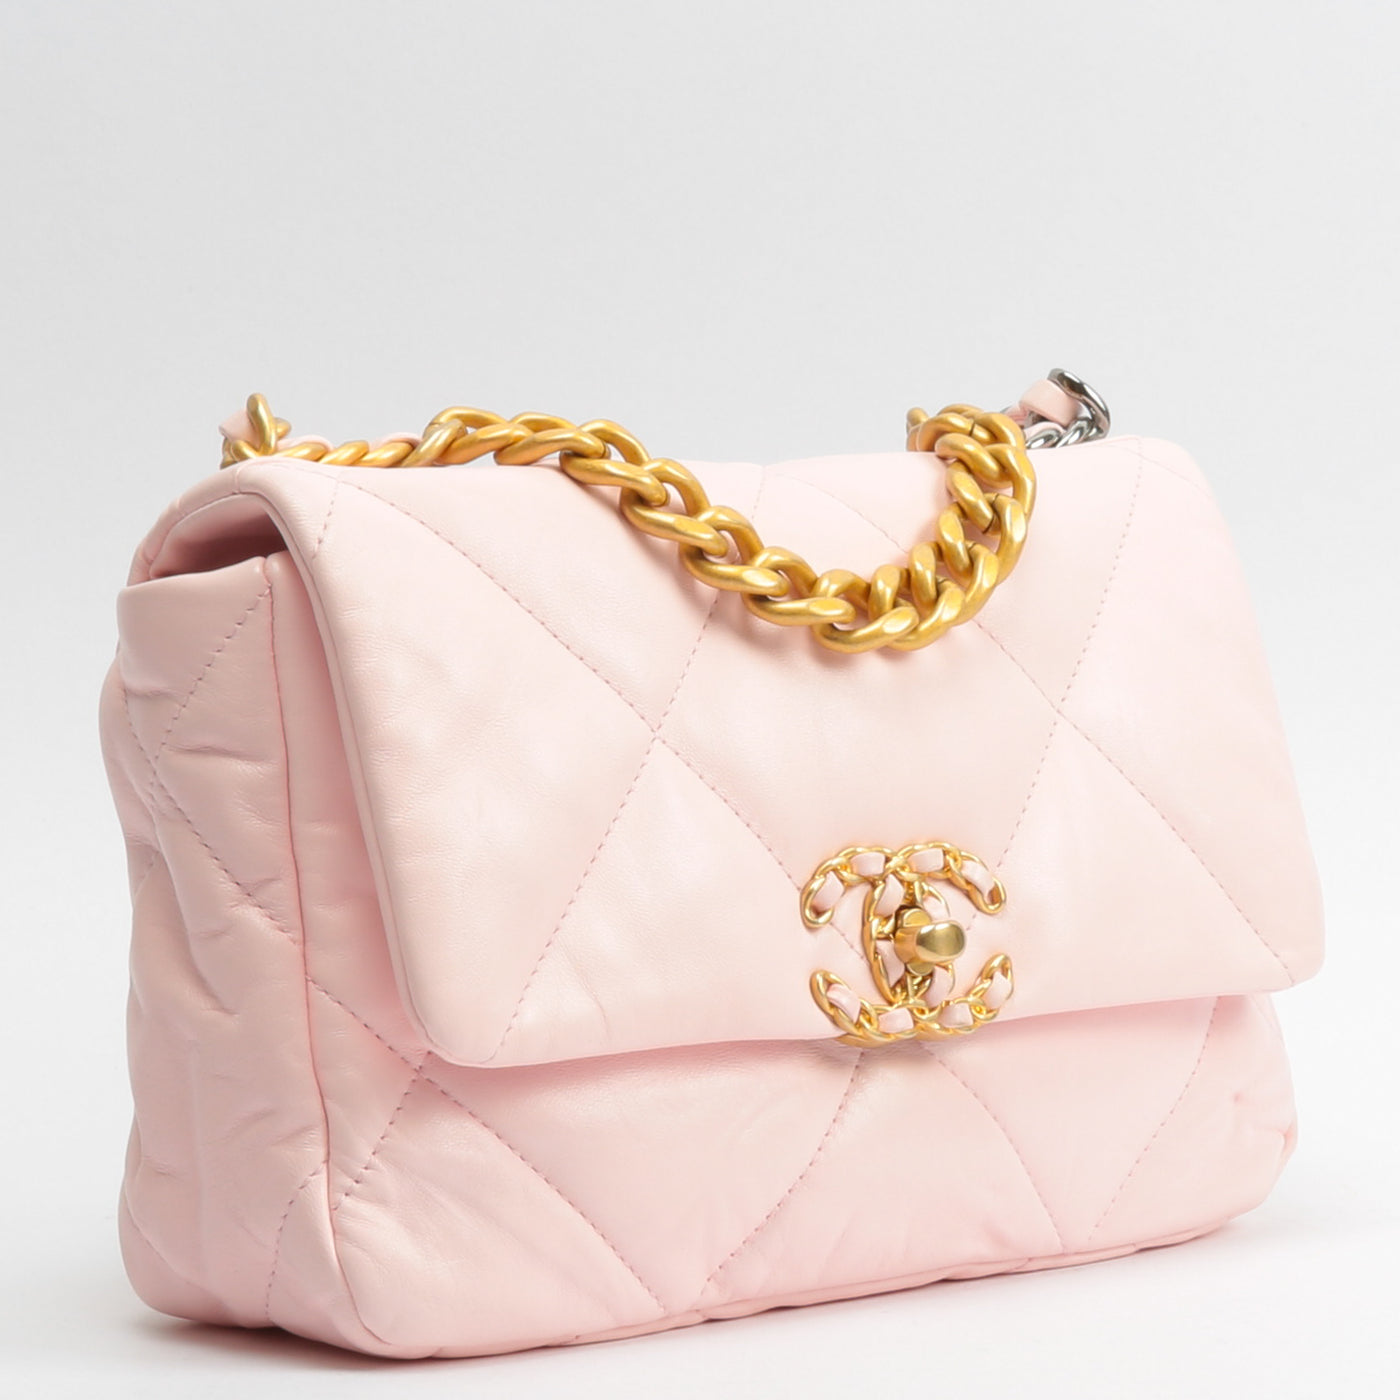 CHANEL 19 Flap Quilted Medium Pink